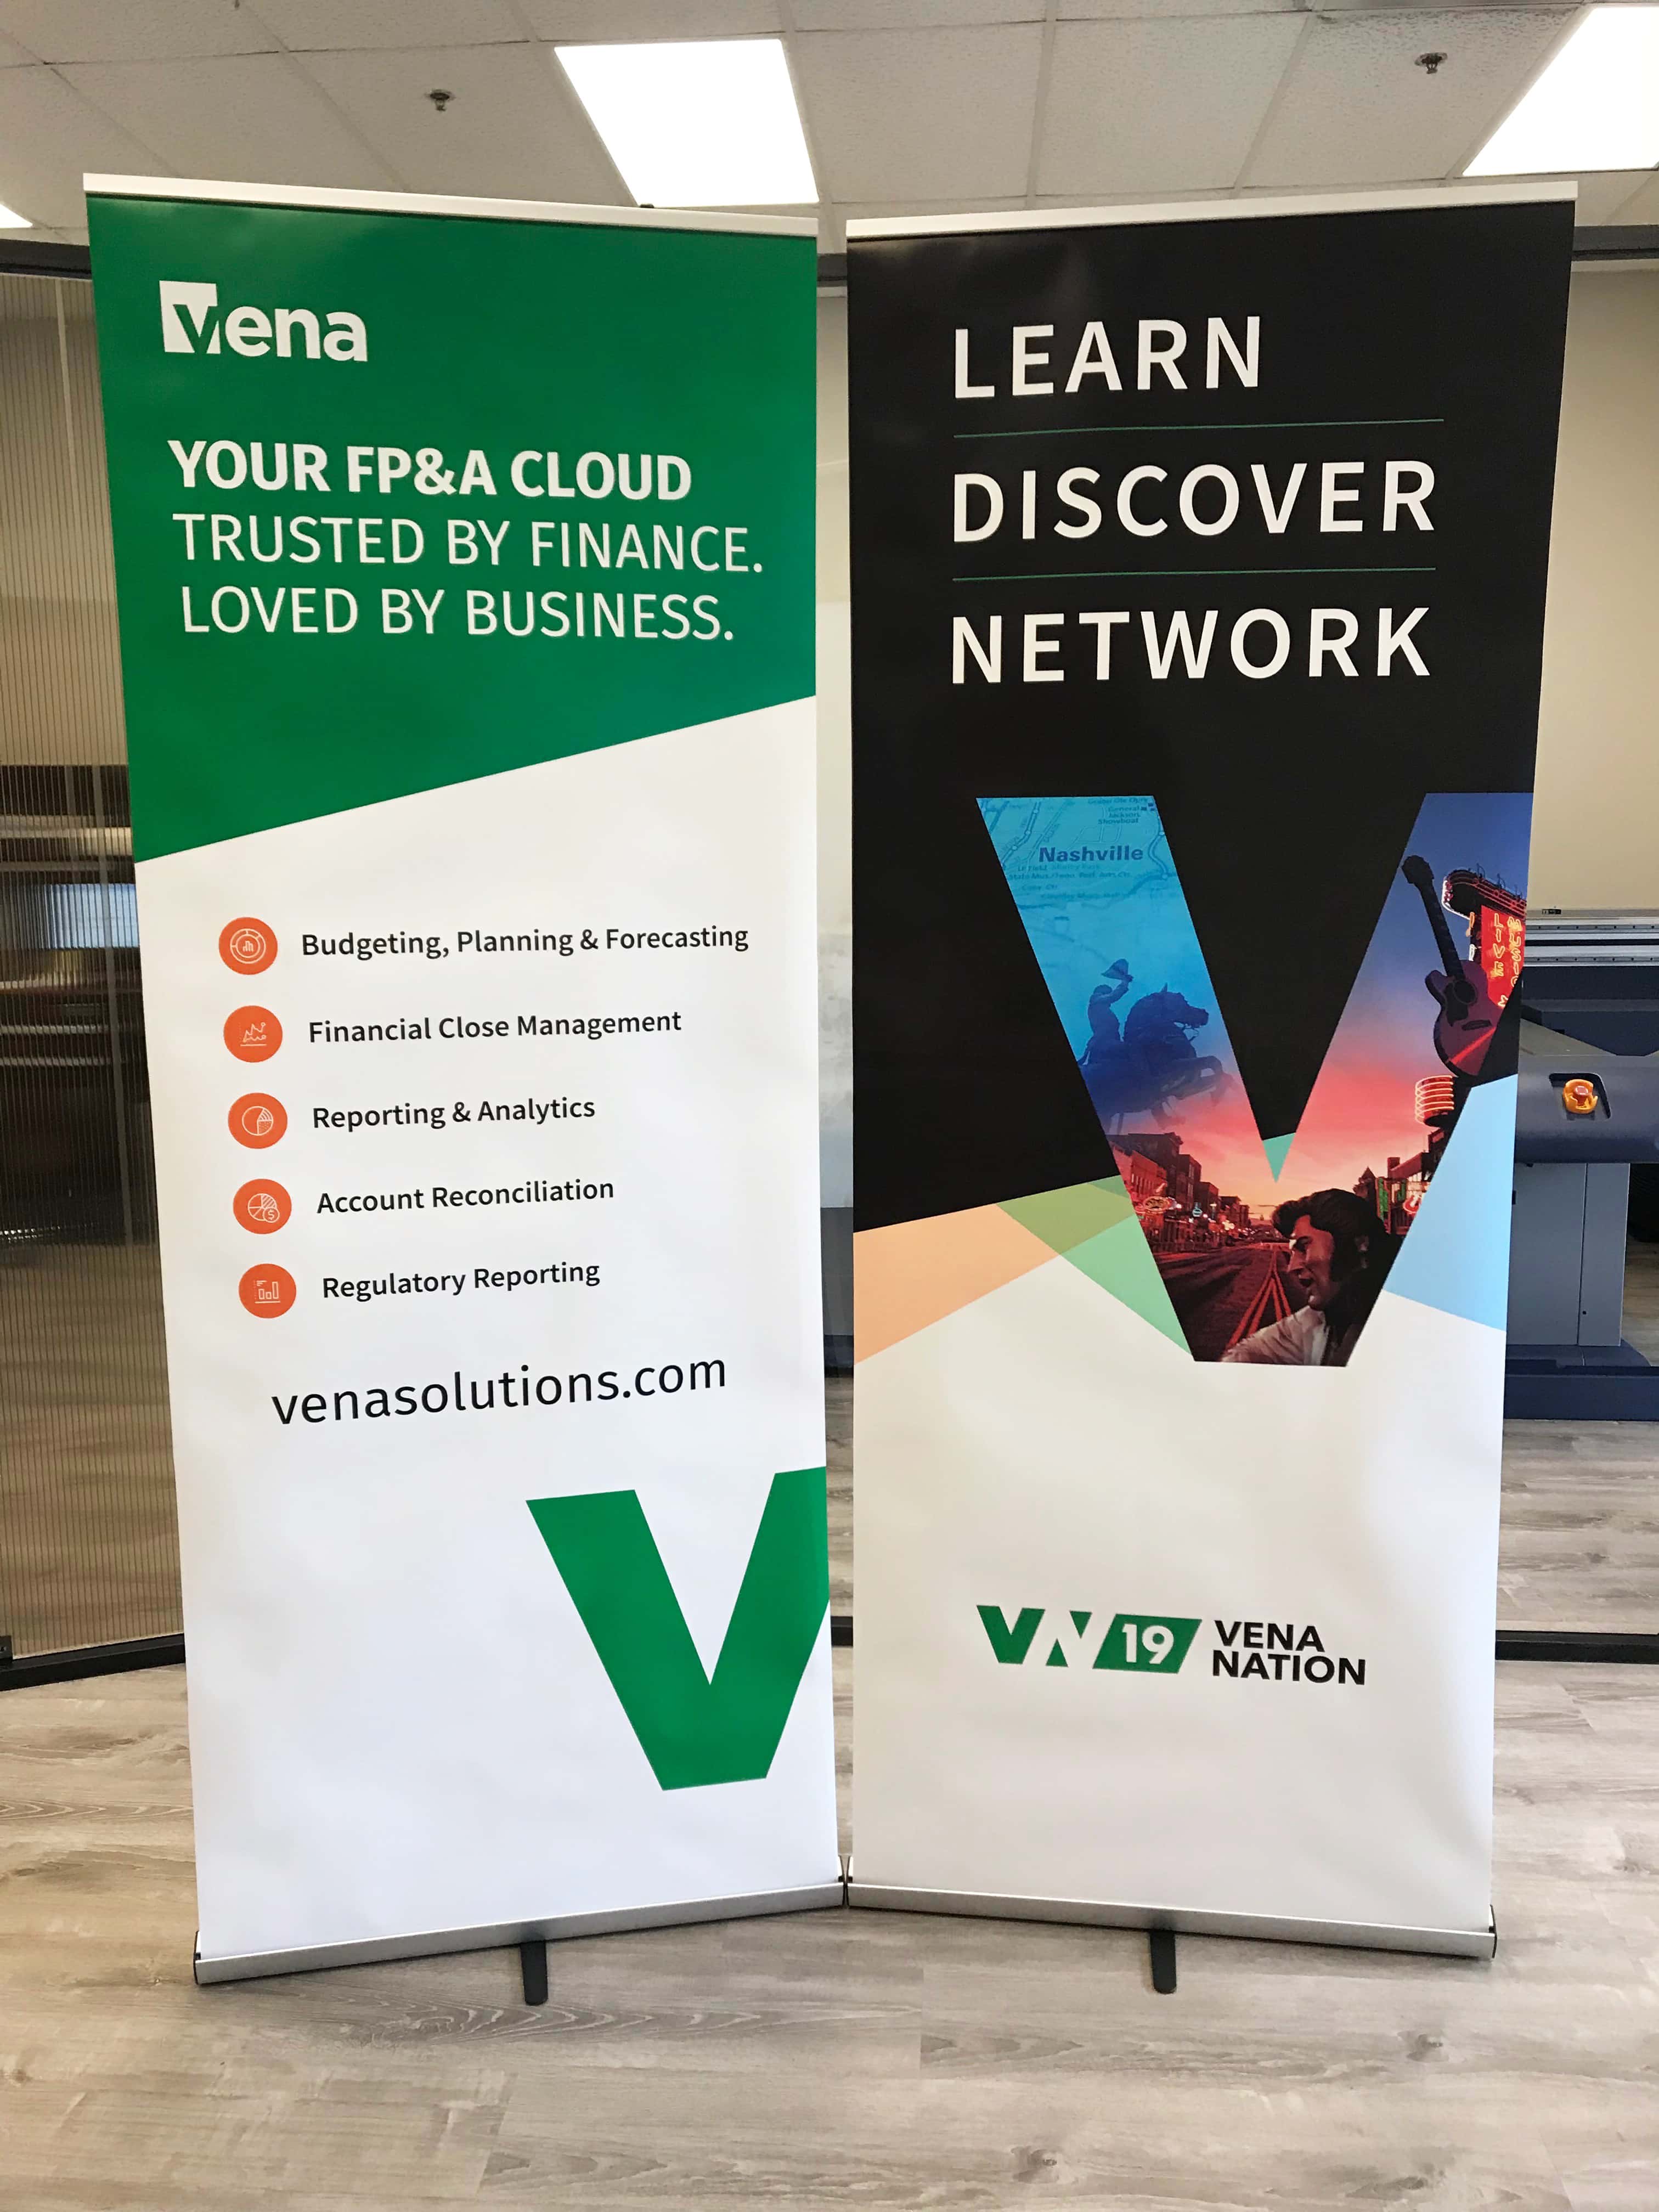 Retractable Banners for Vena Solutions by 12-Point SignWorks in Franklin, TN.